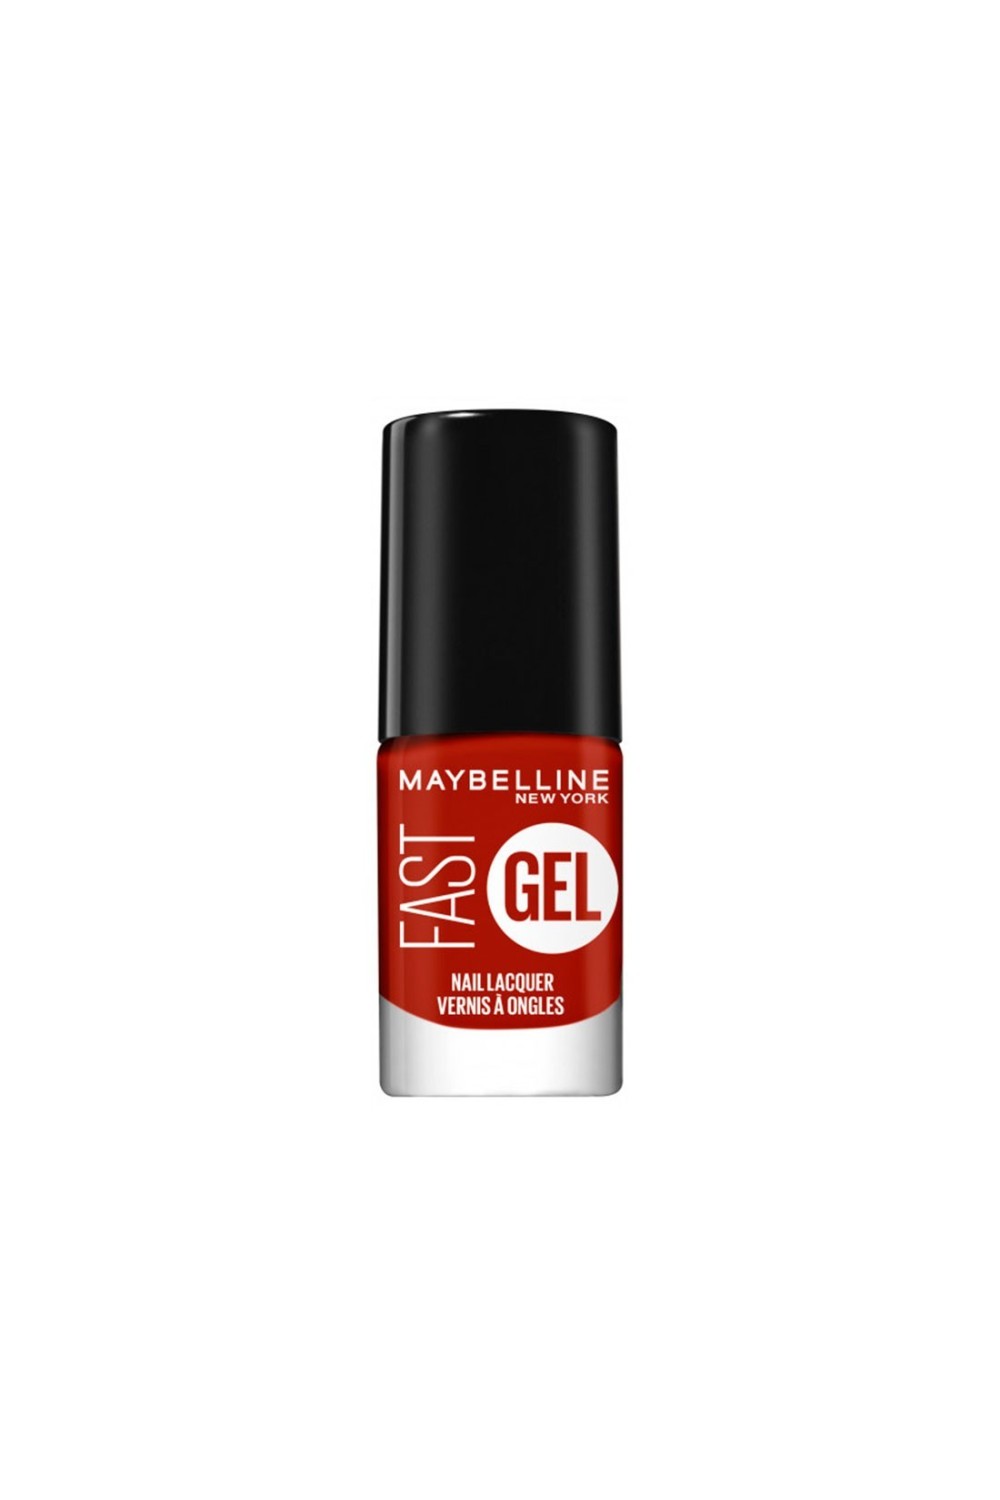 Maybelline Fast Gel Nail Lacquer 11-Red Punch